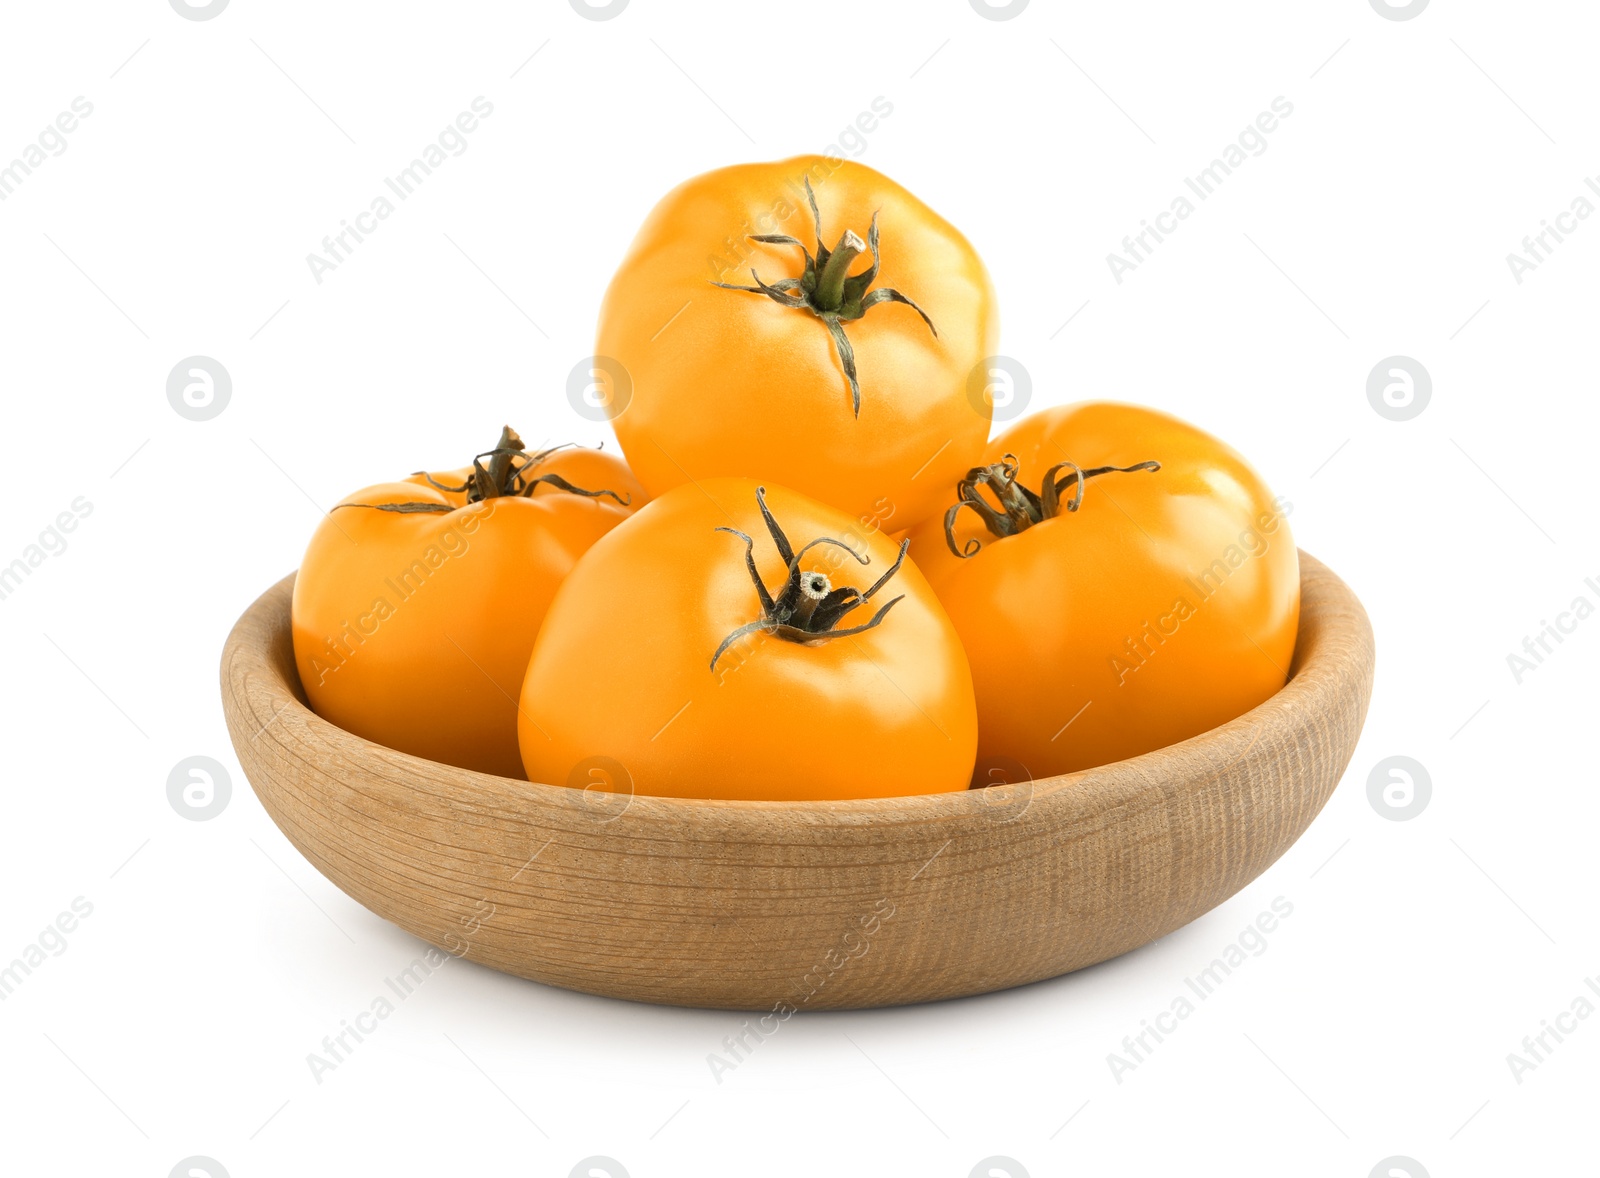 Photo of Wooden bowl of fresh ripe yellow tomatoes isolated on white